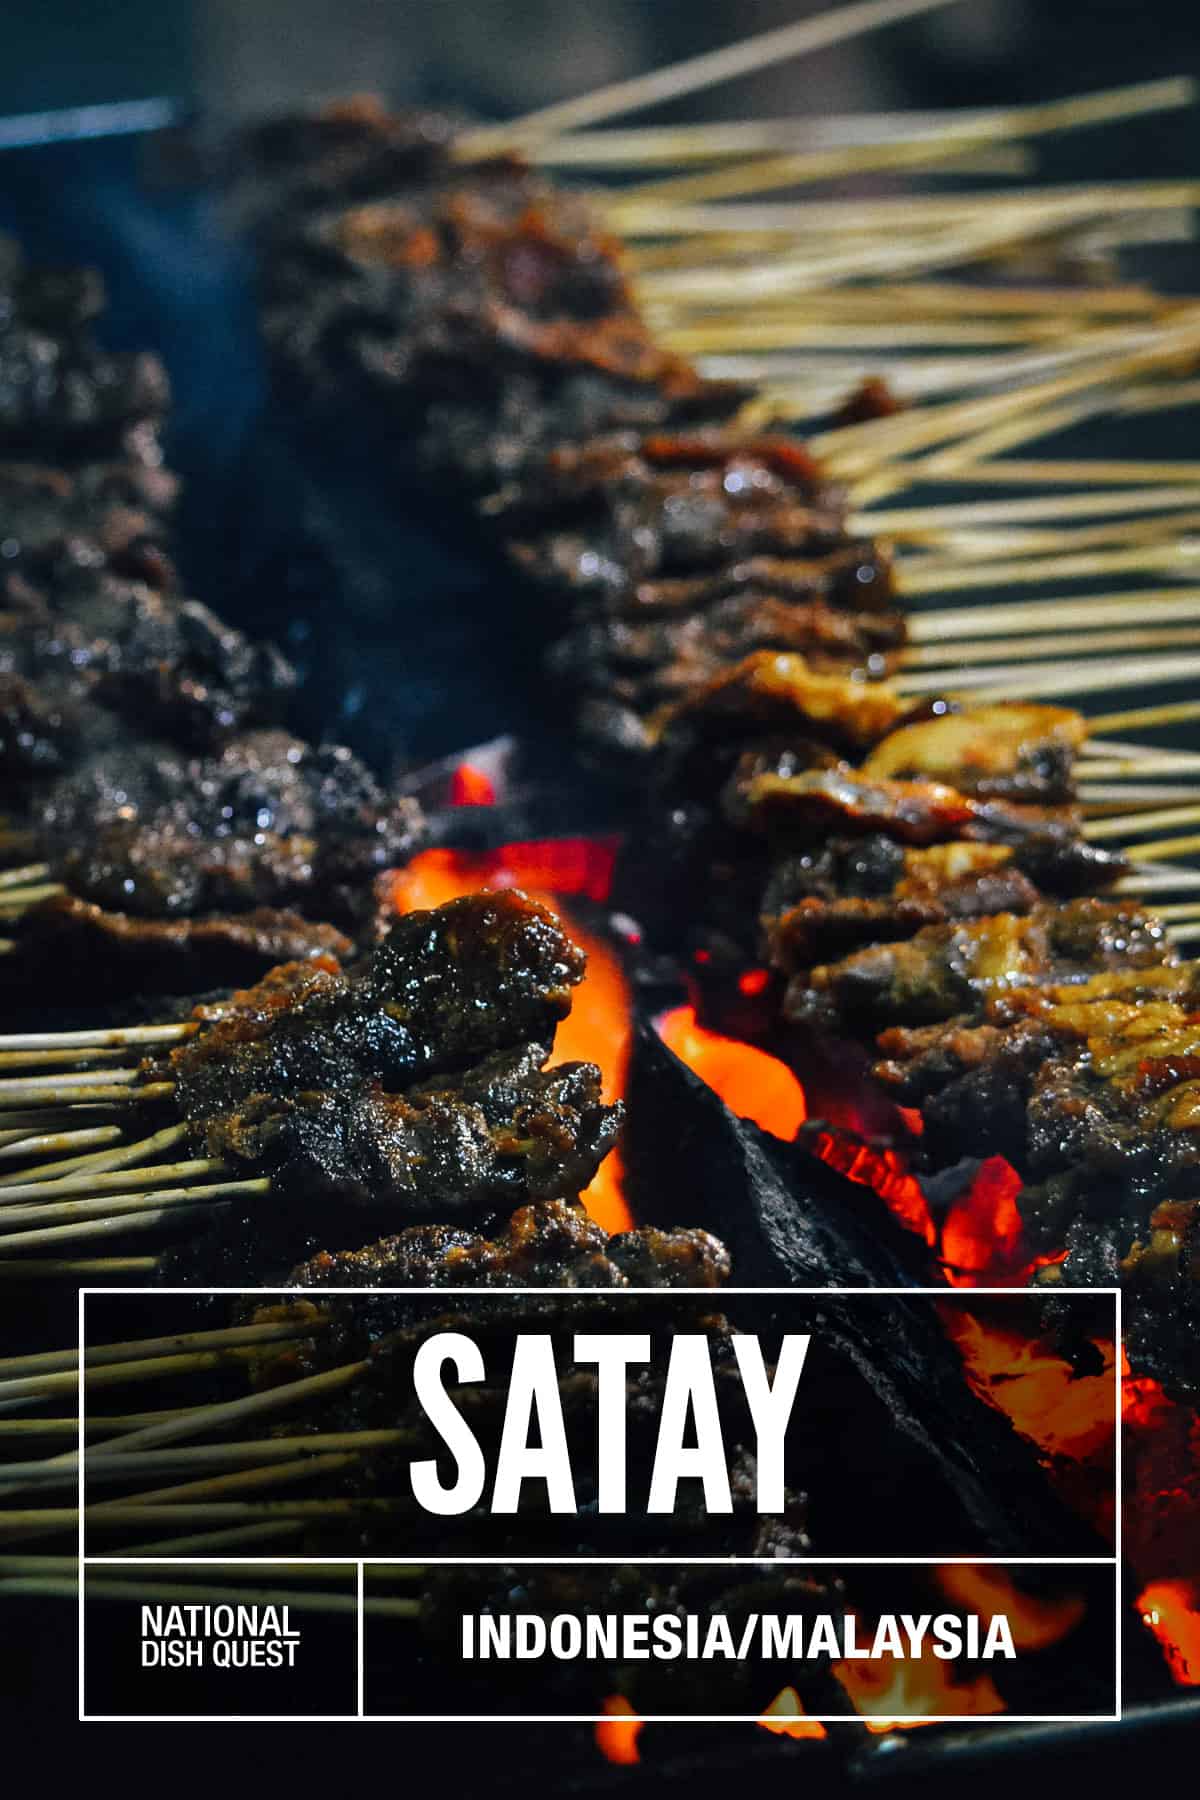 Sticks of satay grilling over coals